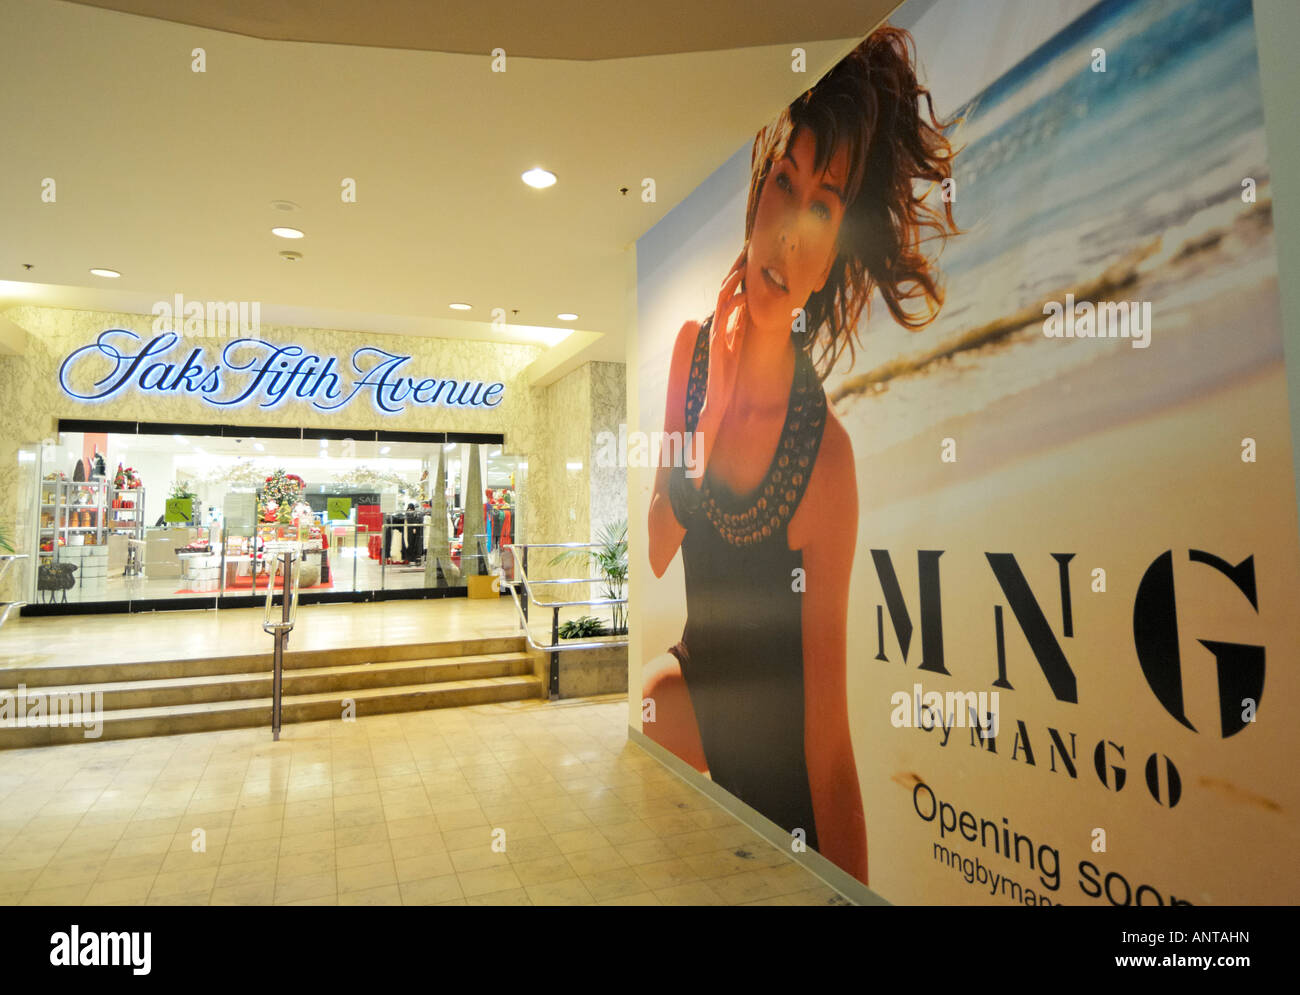 Mall at copley place hi-res stock photography and images - Alamy